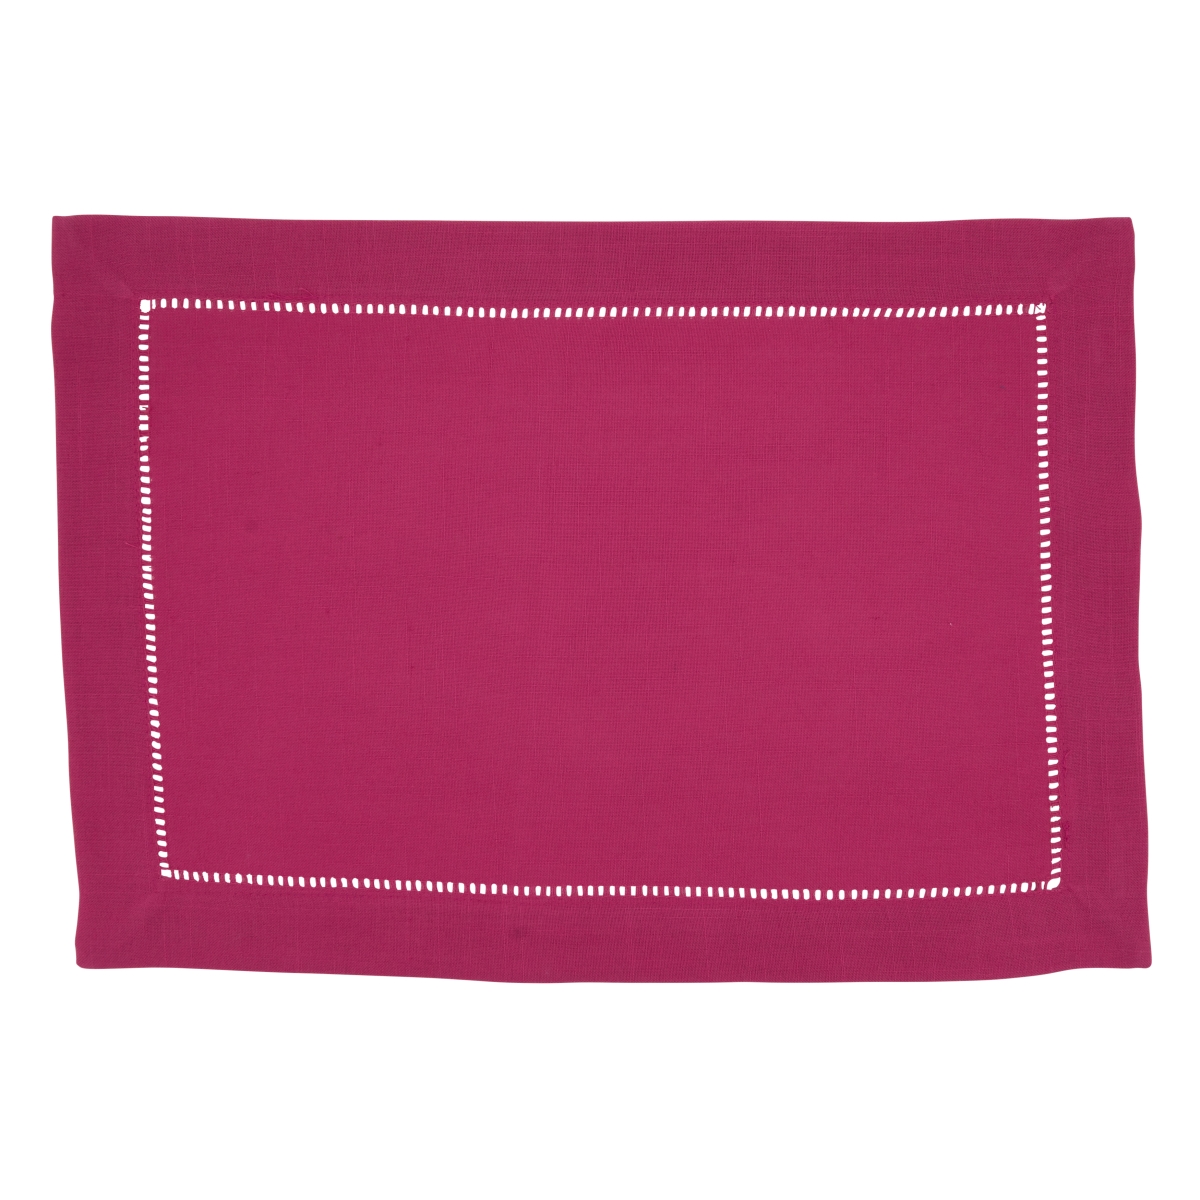 Cookhouse SARO  14 x 20 in. Oblong Classic Hemstitch Border Placemat  Fuchsia - Set of 12